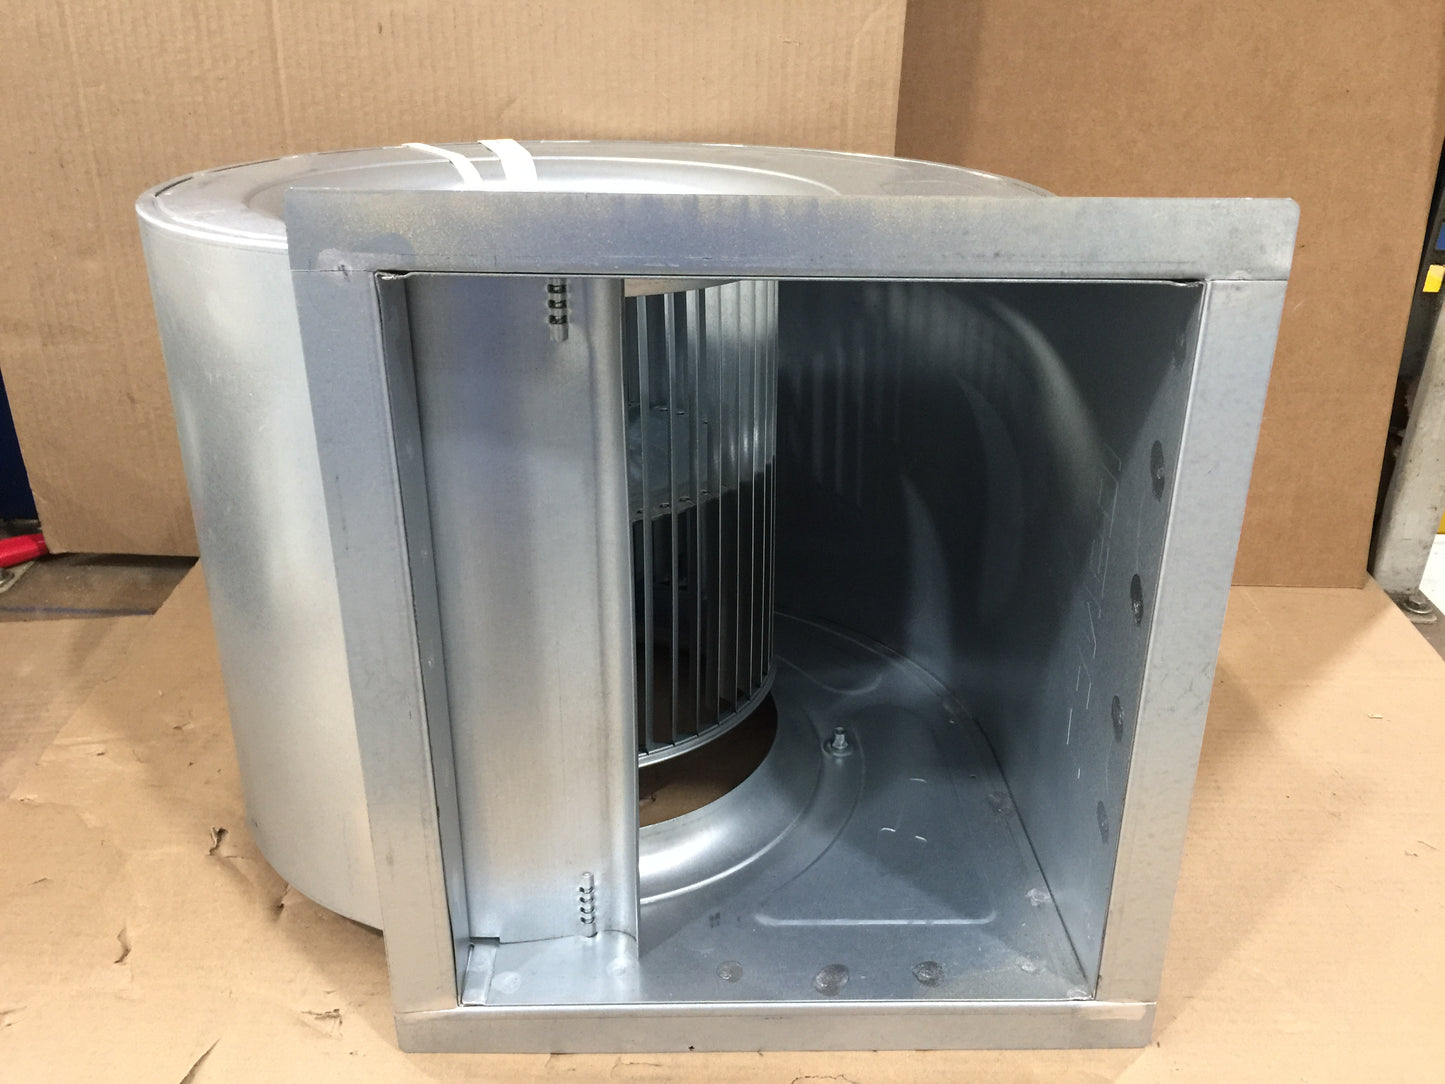 BLOWER FAN; CENTRIFUGAL, LESS MOTOR AND SHAFT